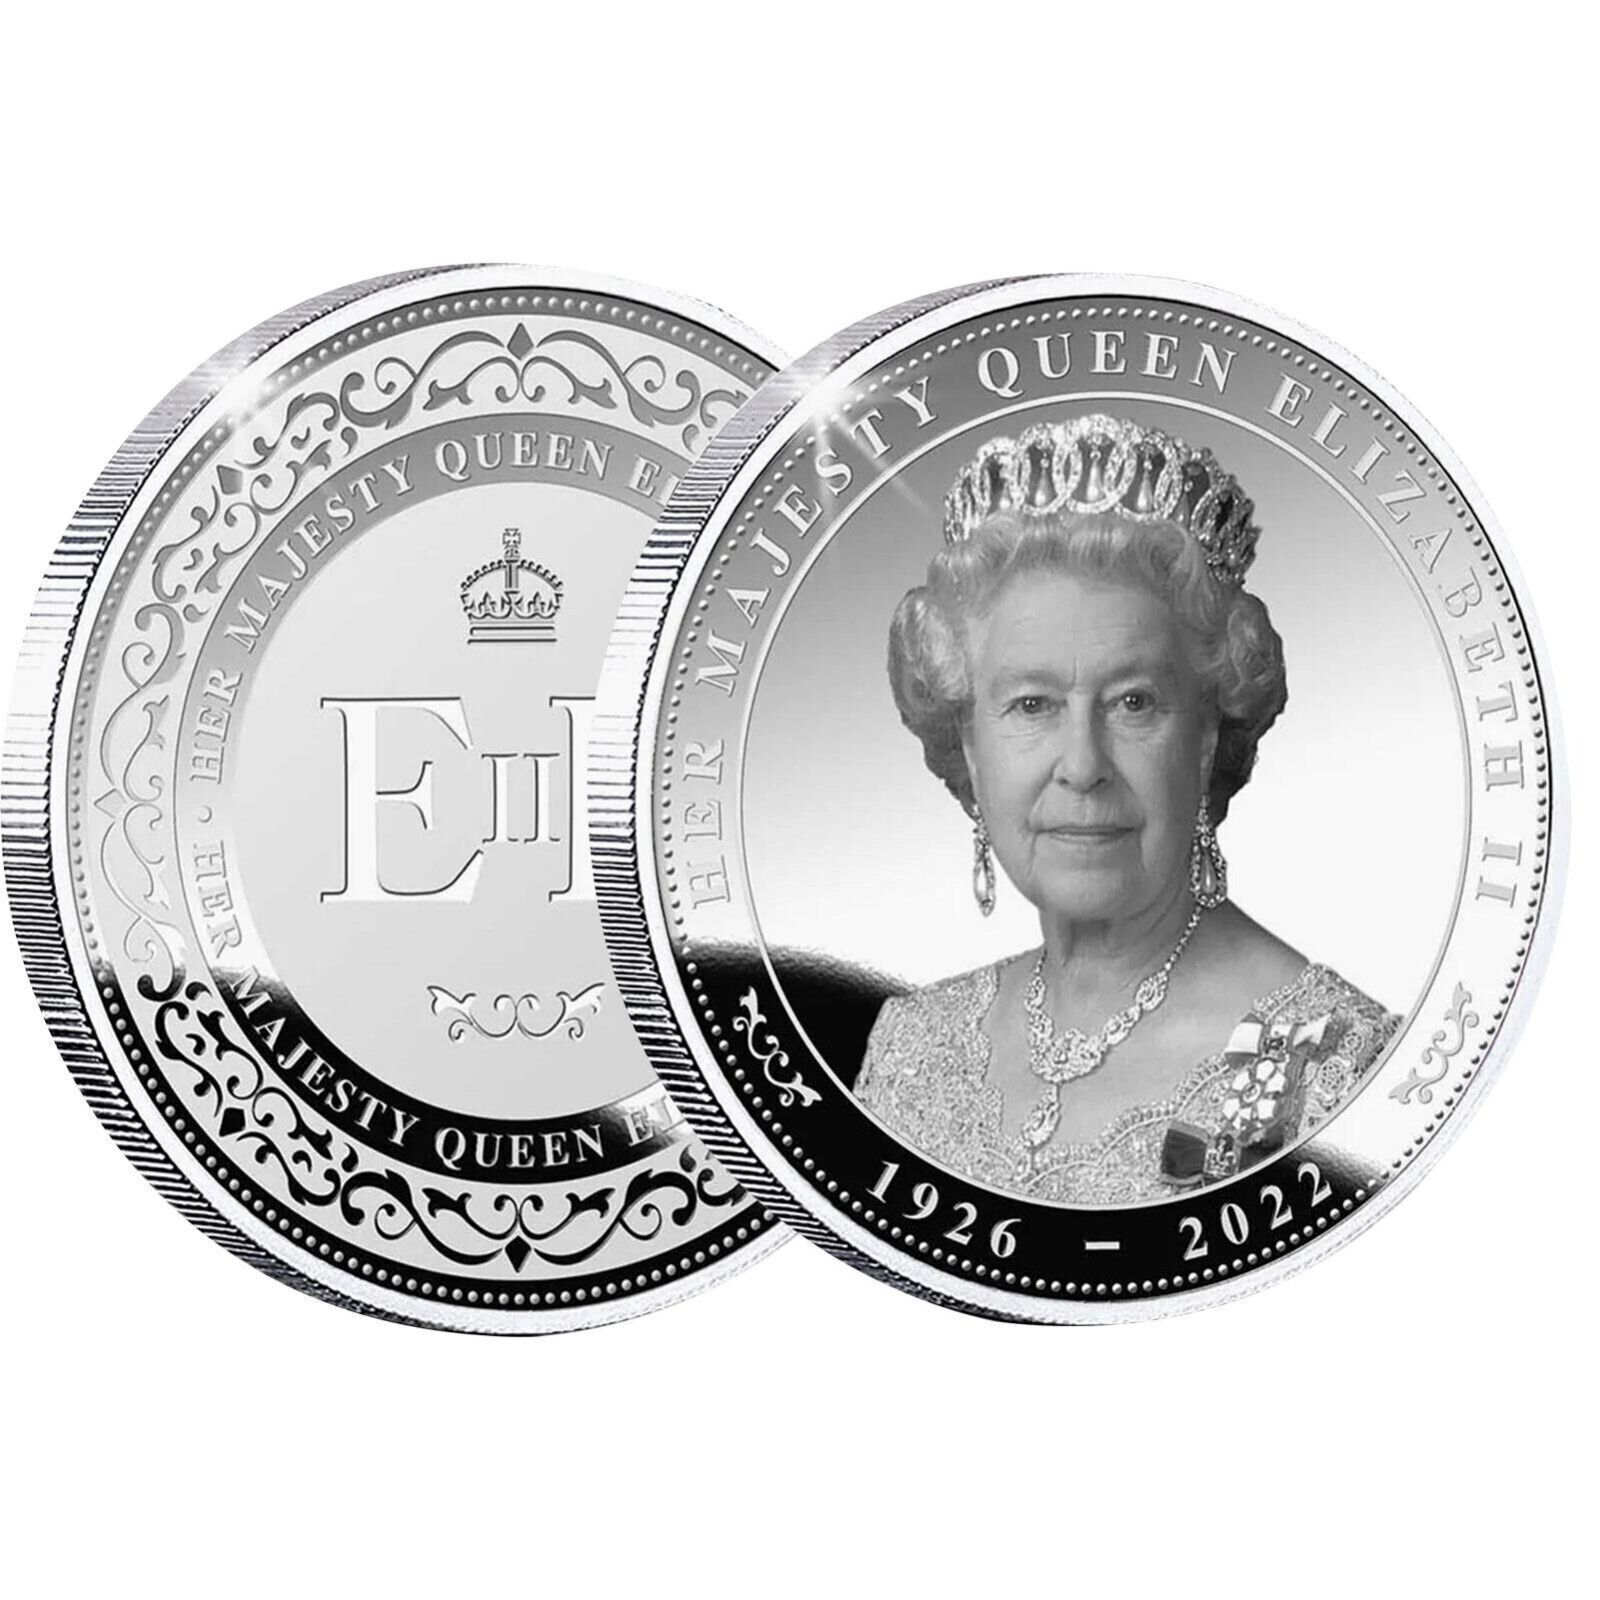 High Quality Queen Elizabeth II Memorial Coin 1926-2022 Featuring Her Majesty